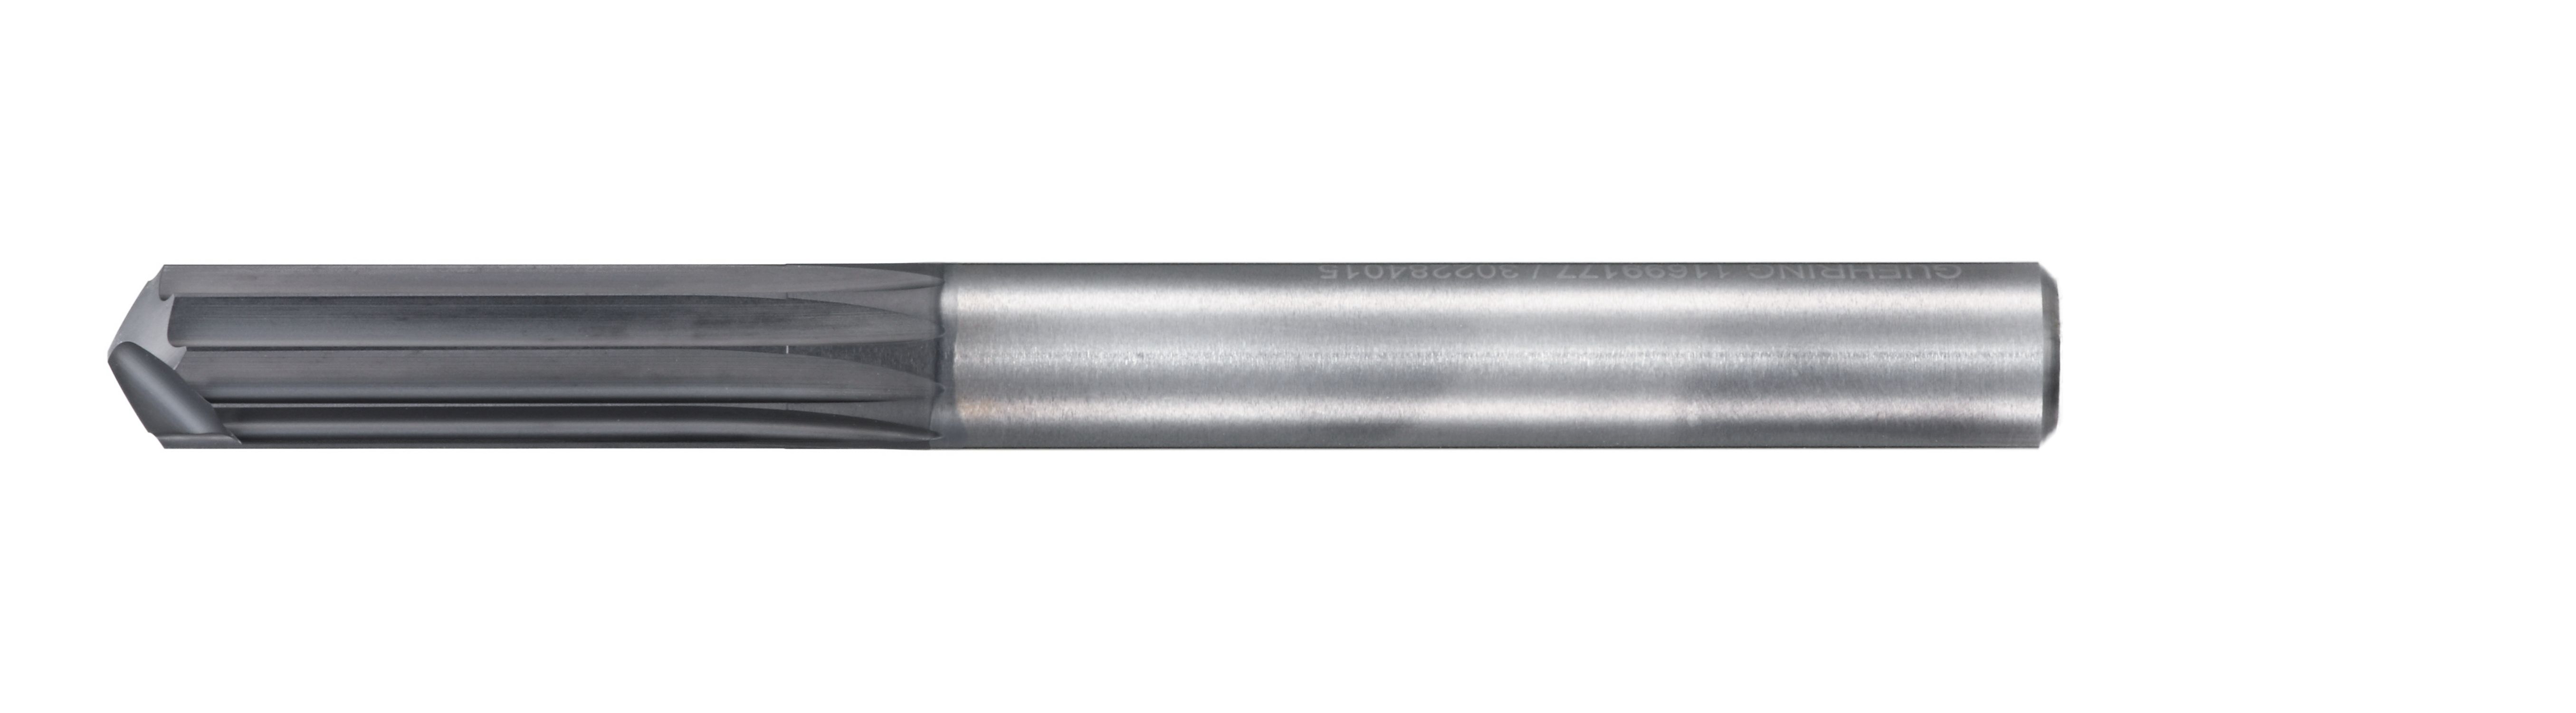 Grooving/Shouldering Multi-Flute End Mill for CFRP with Drill Point CR100 6720 (6720-008.000) 